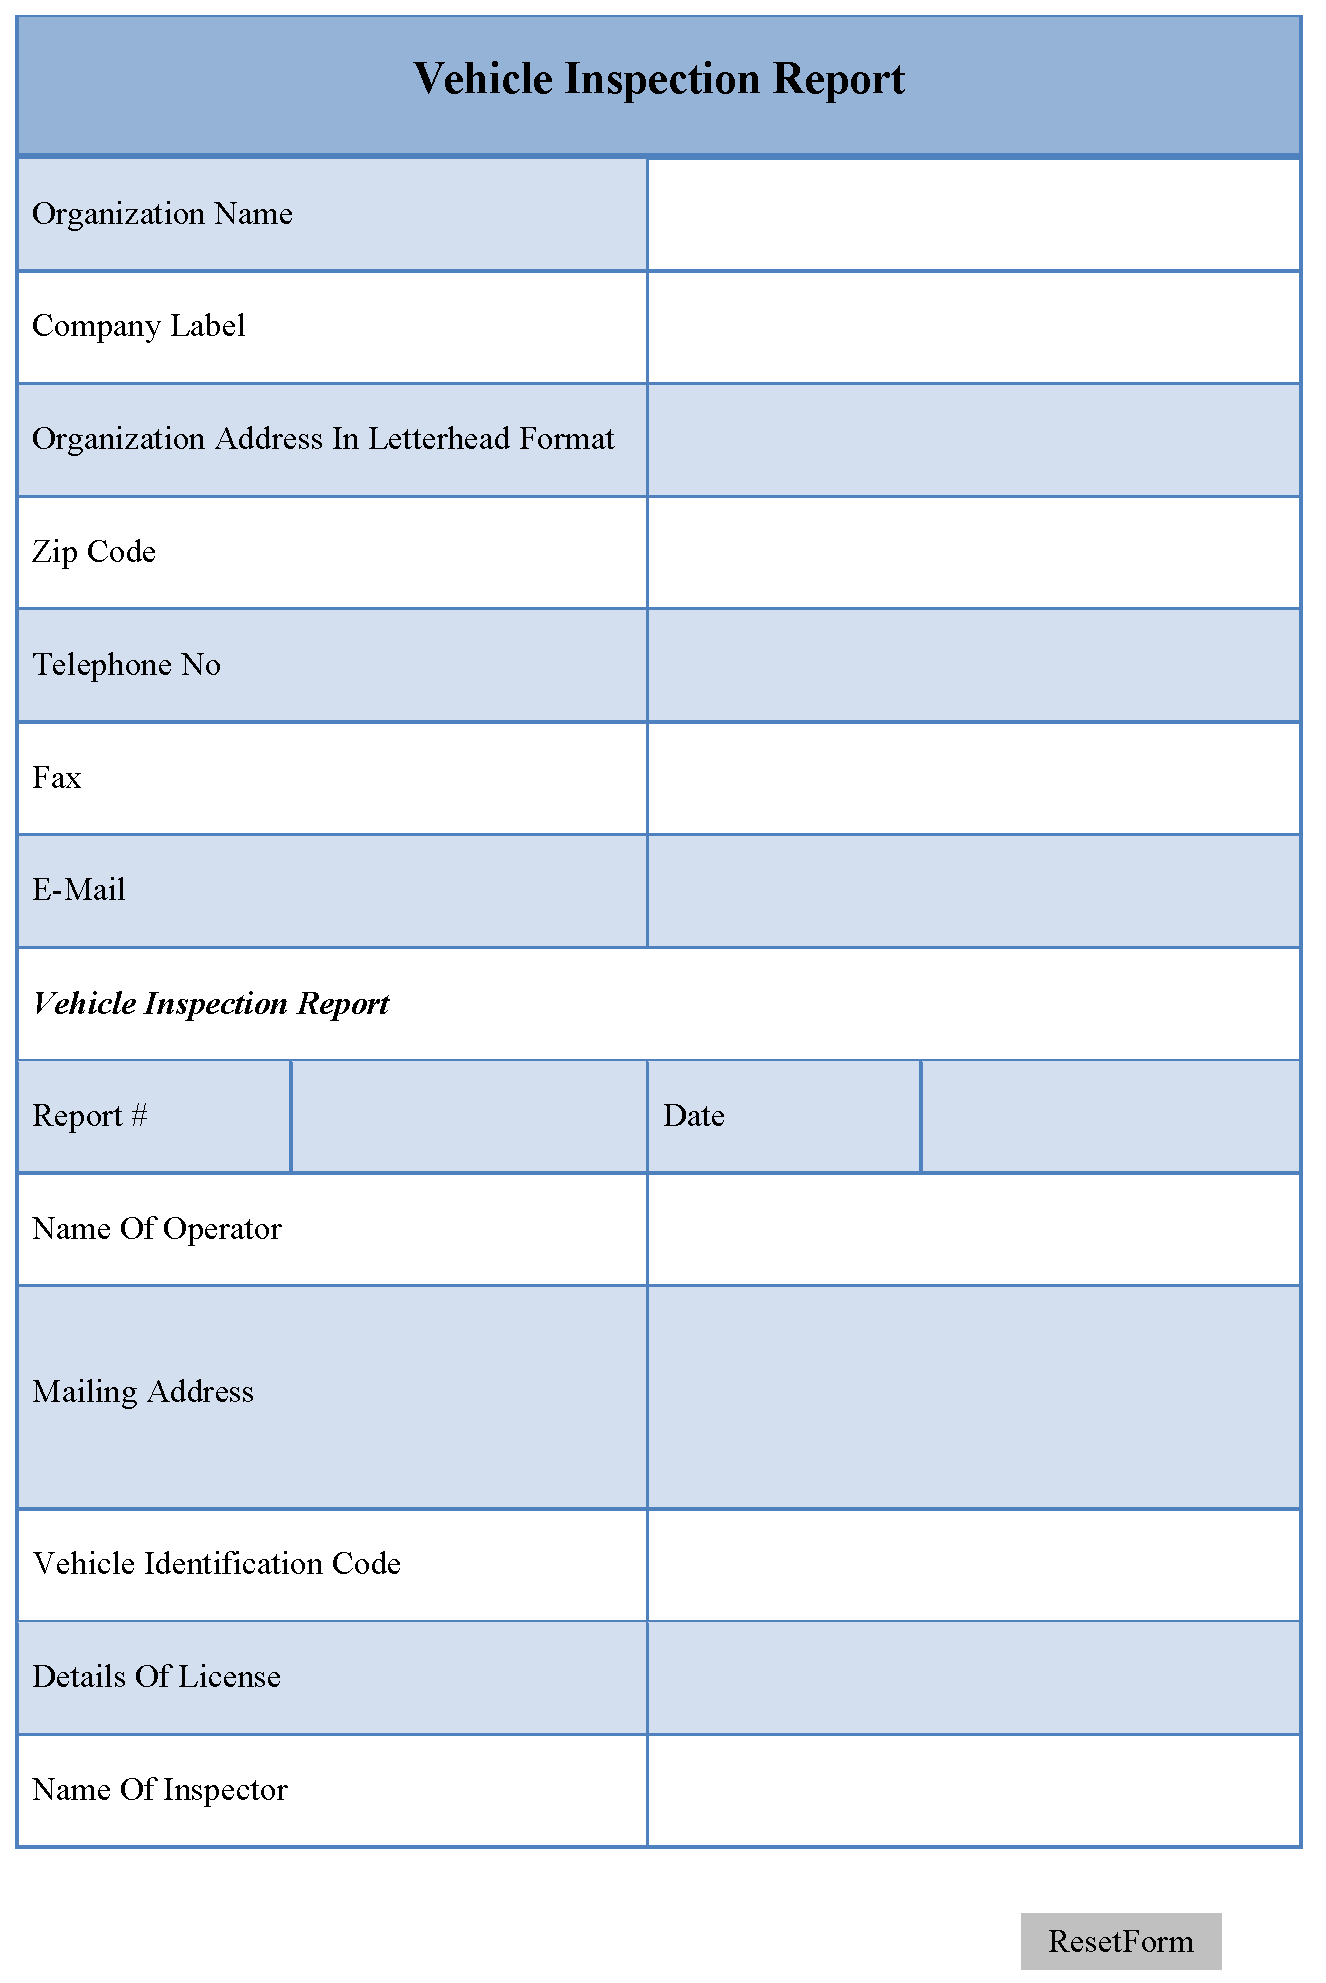 Vehicle Inspection Report Template | Editable Forms Intended For Vehicle Inspection Report Template